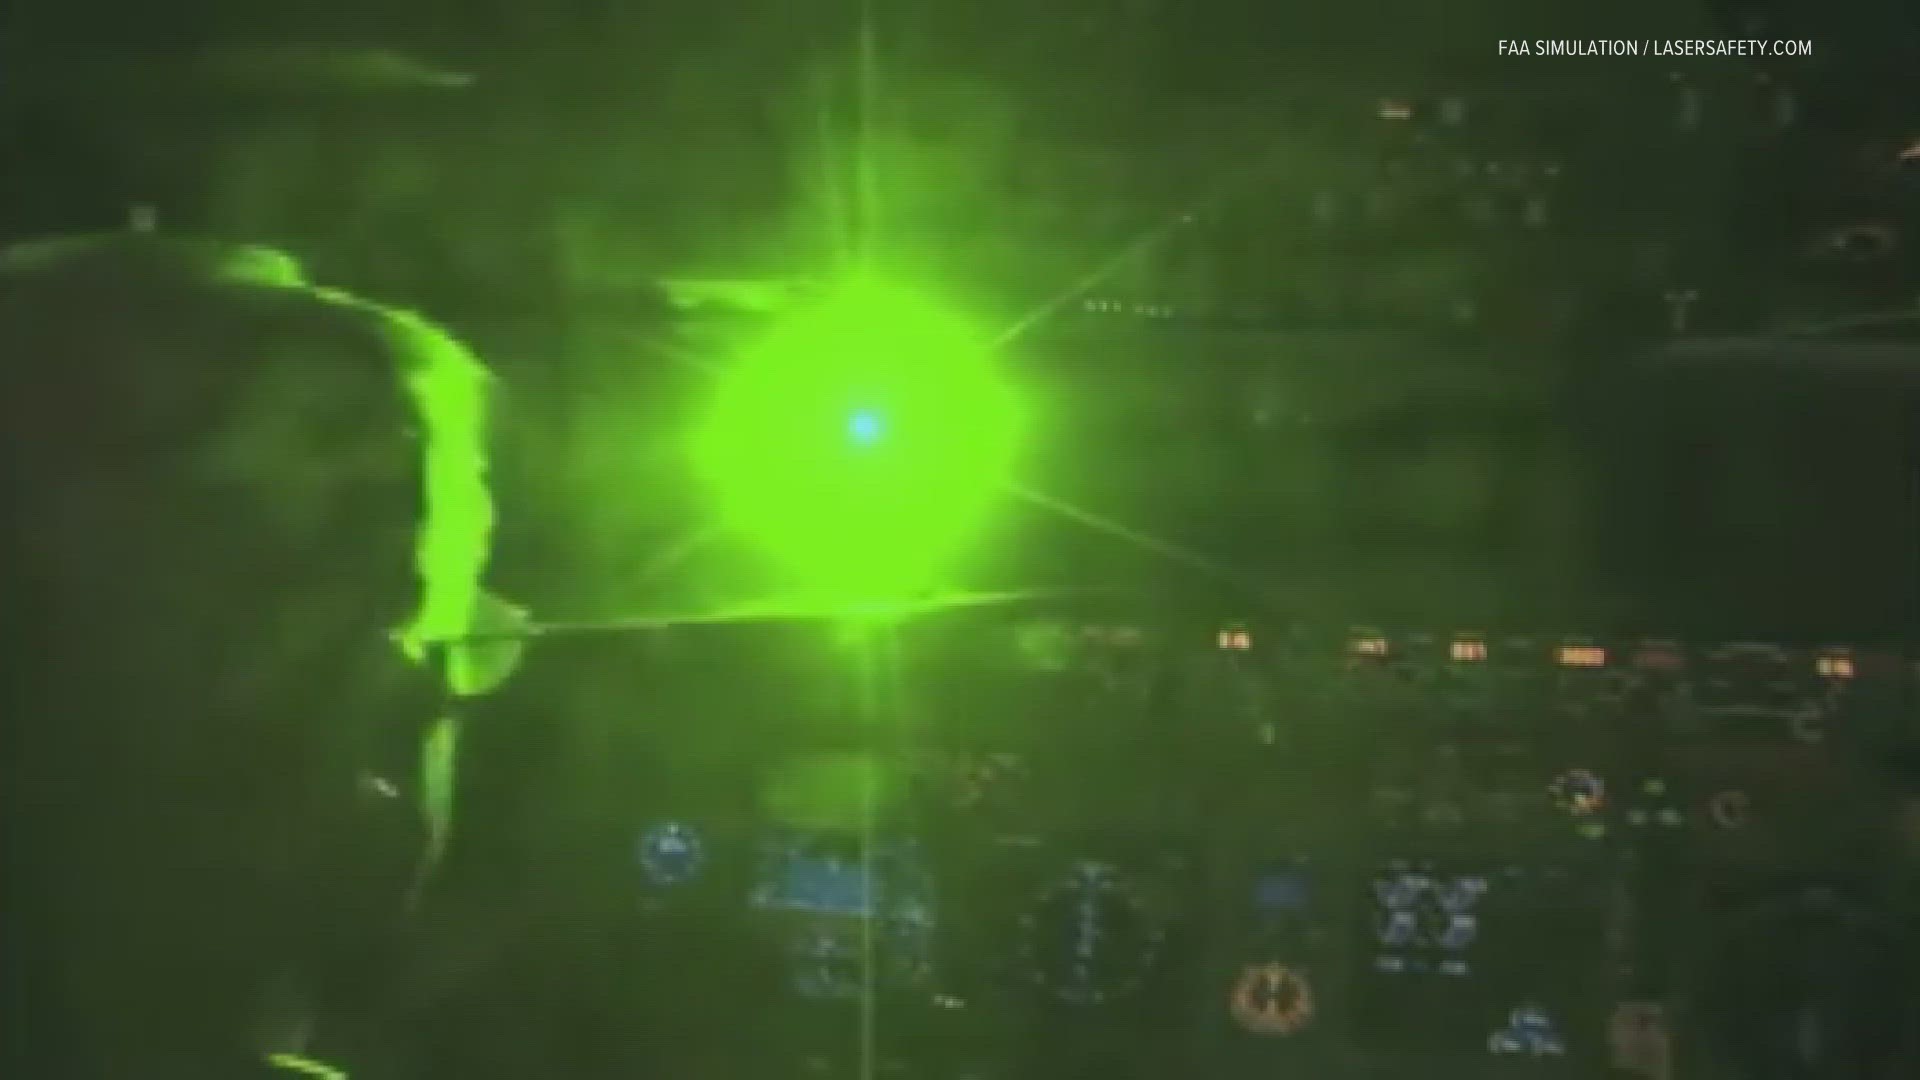 Indiana has seen a big increase in incidents of people shining laser pointers into the cockpit of airplanes.